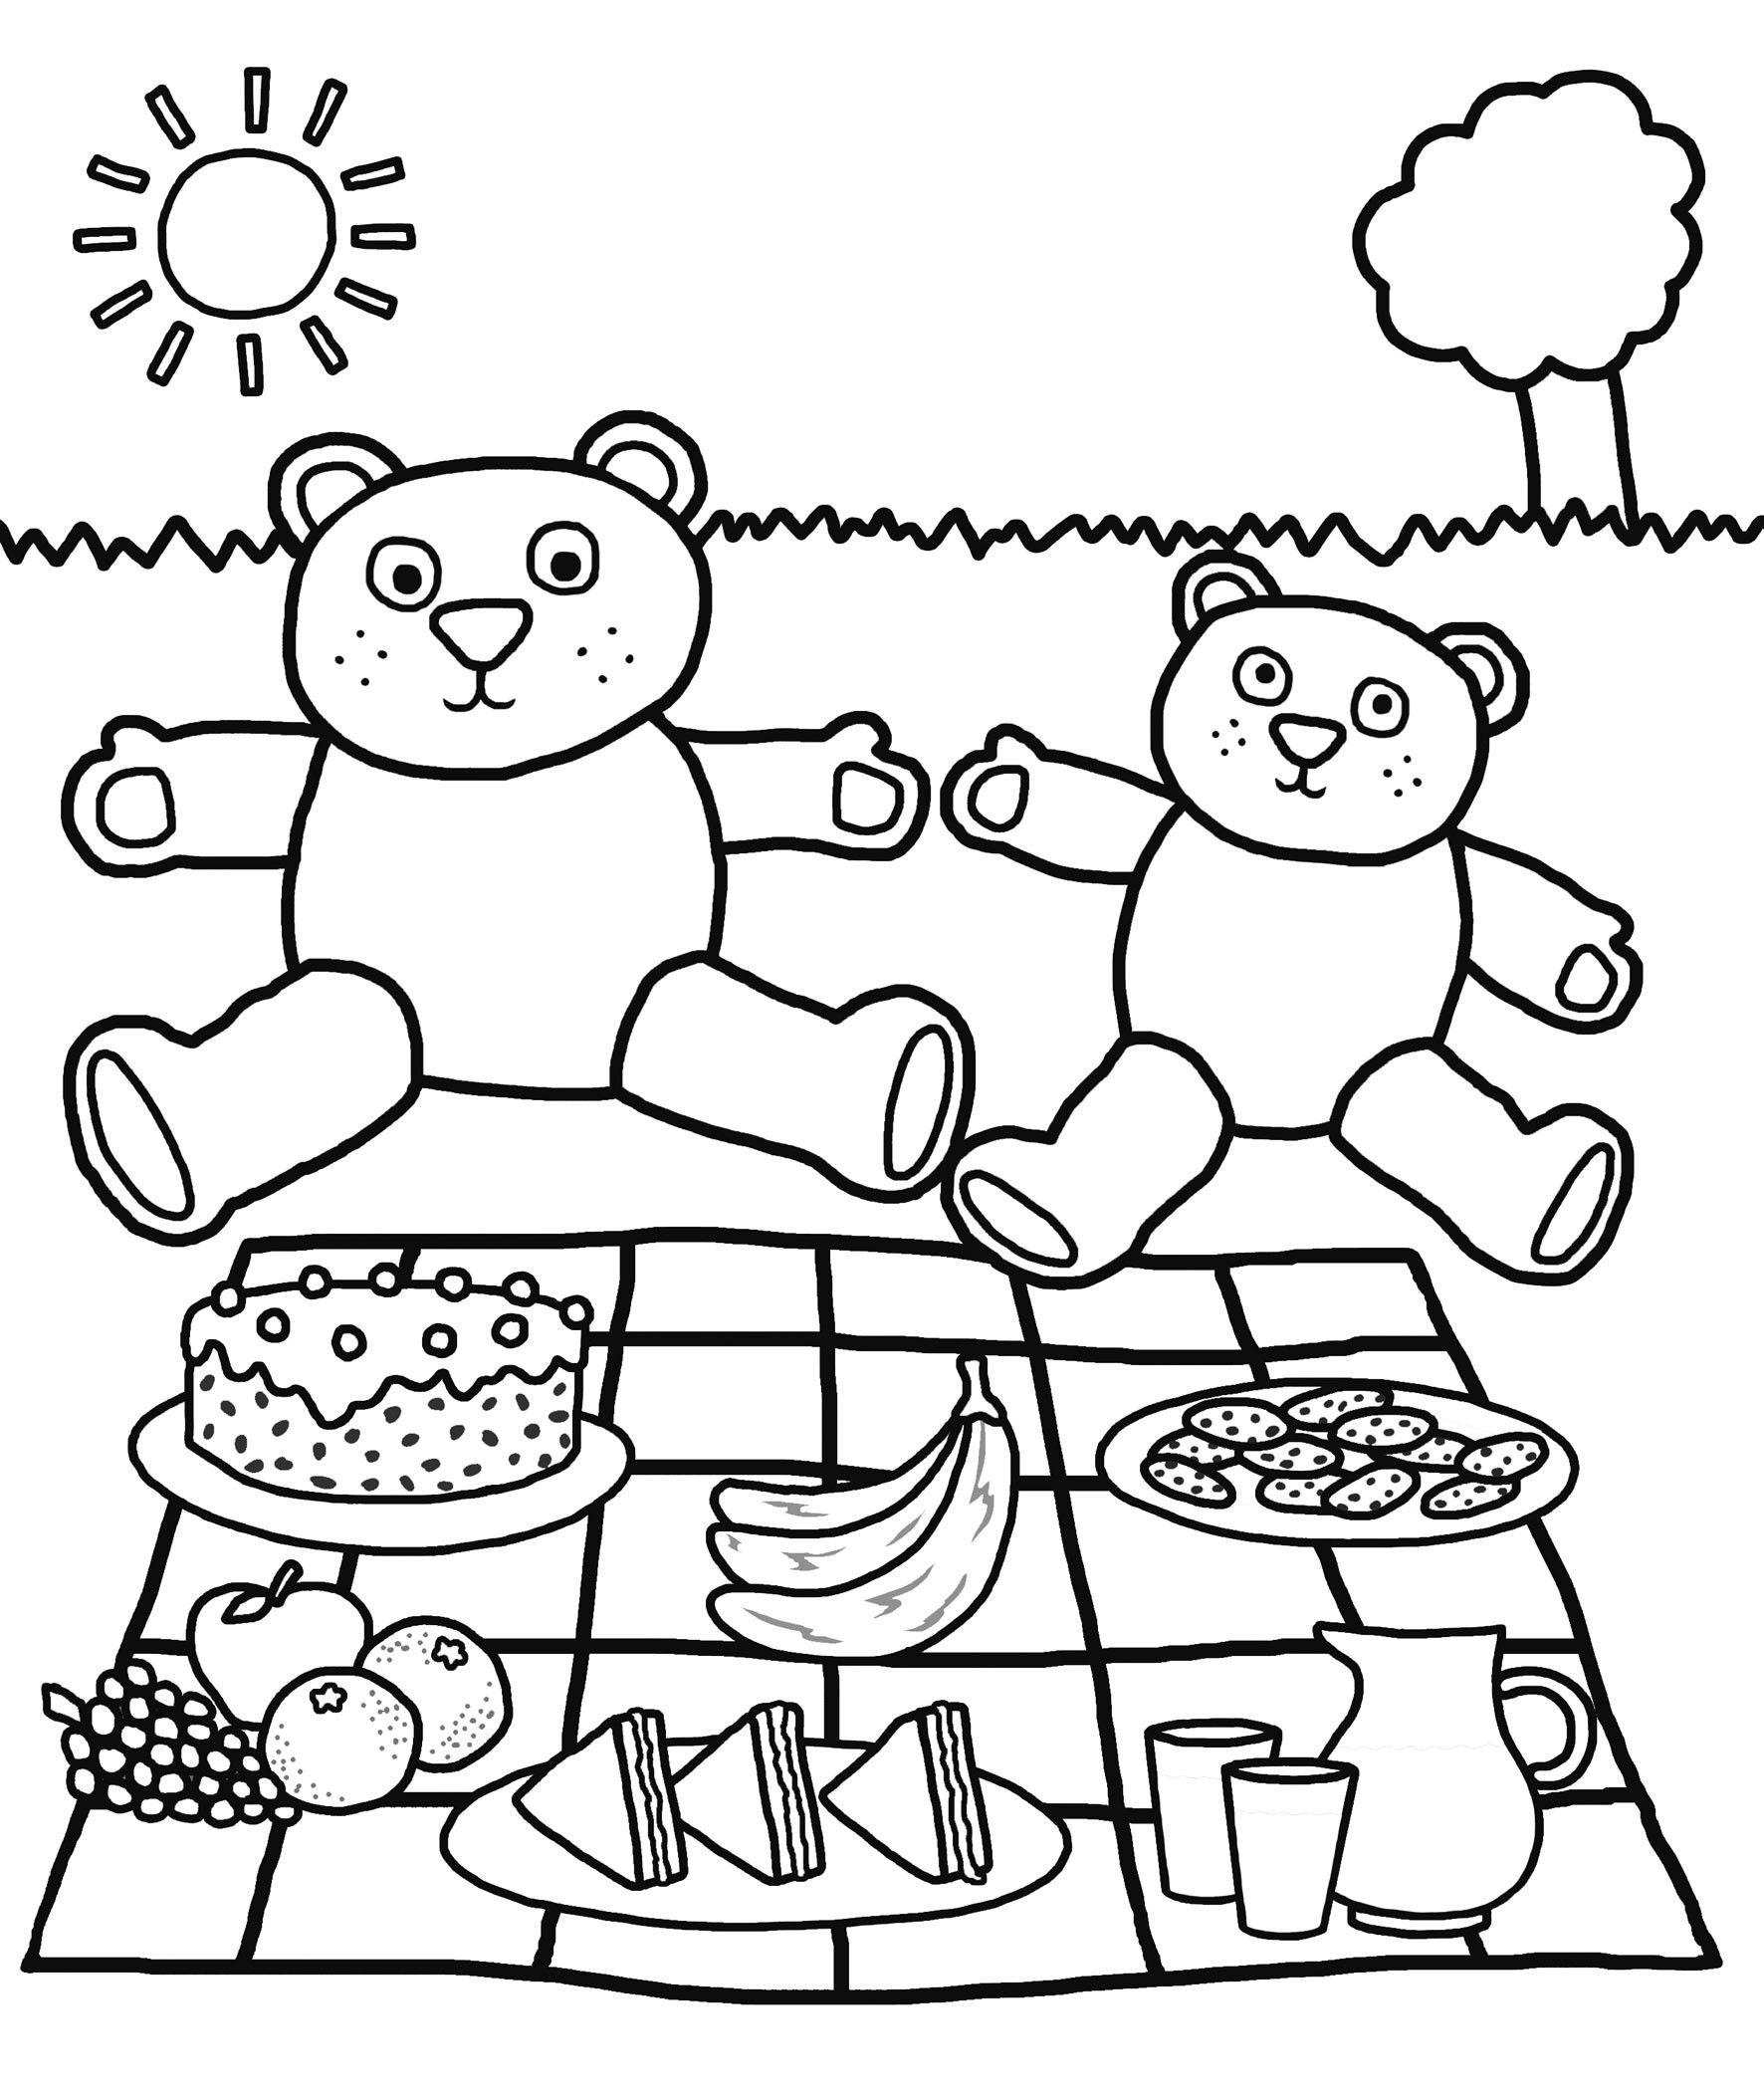 Preschool Printable Coloring Pages
 Free Printable Kindergarten Coloring Pages For Kids